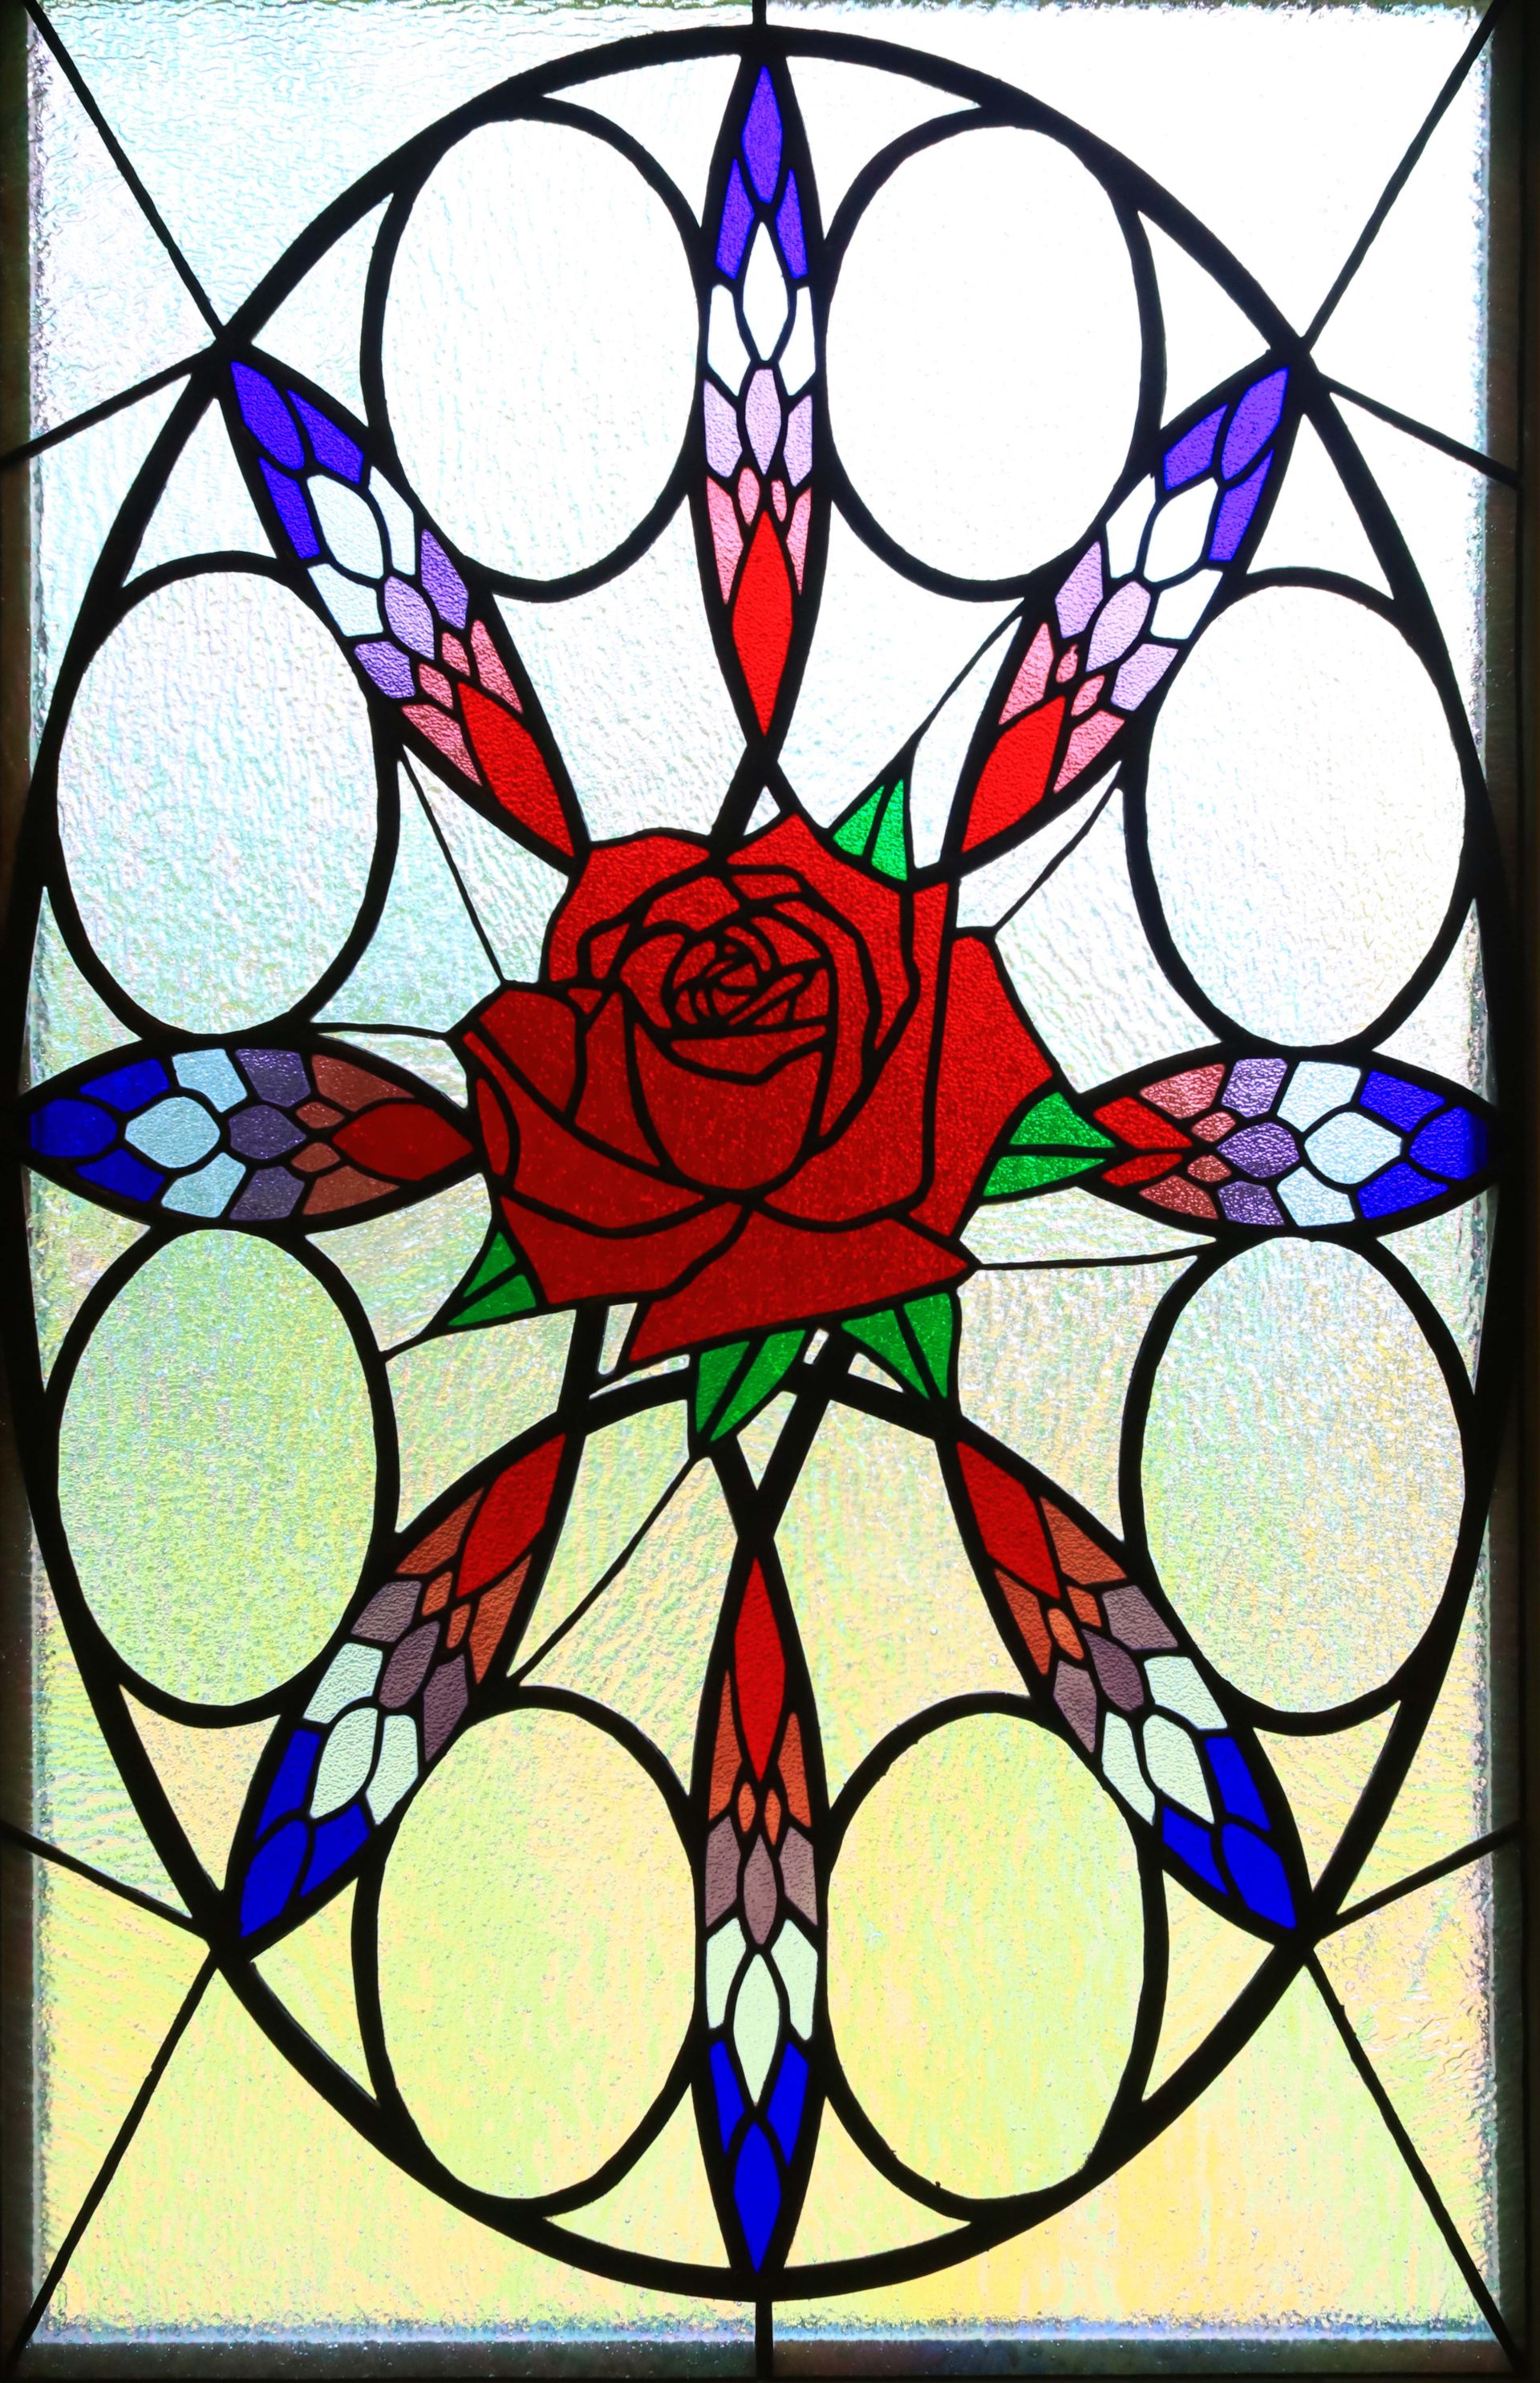 Stained Glass Rose Window